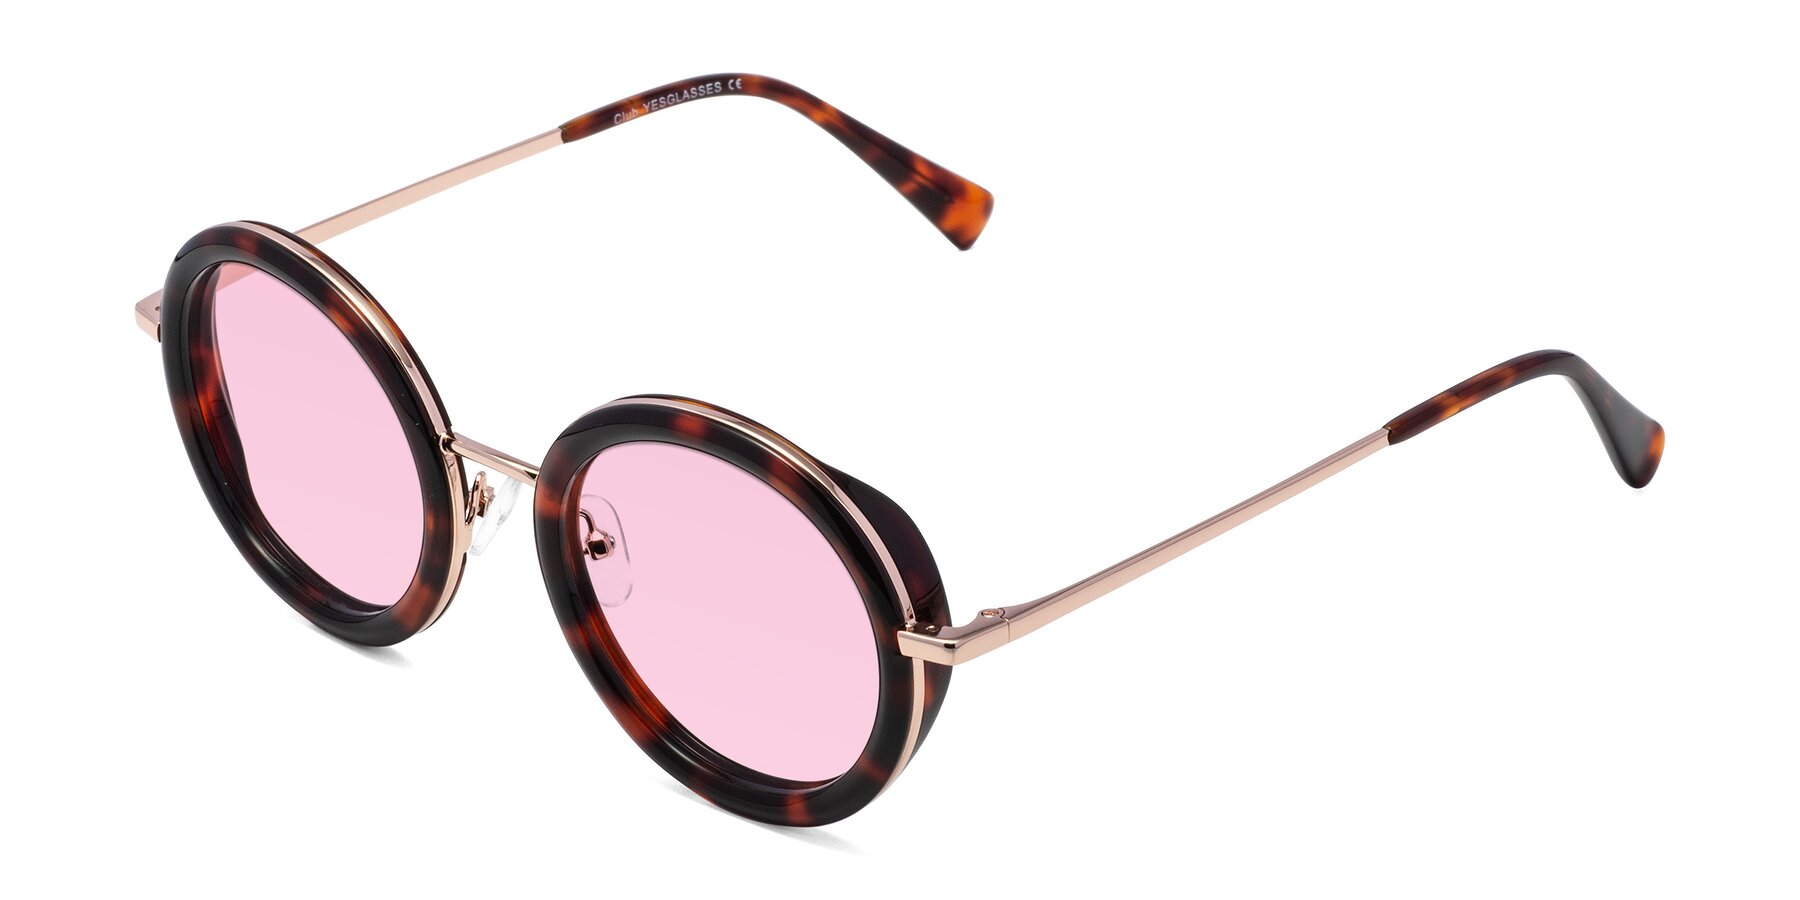 Angle of Club in Tortoise-Rose Gold with Light Pink Tinted Lenses